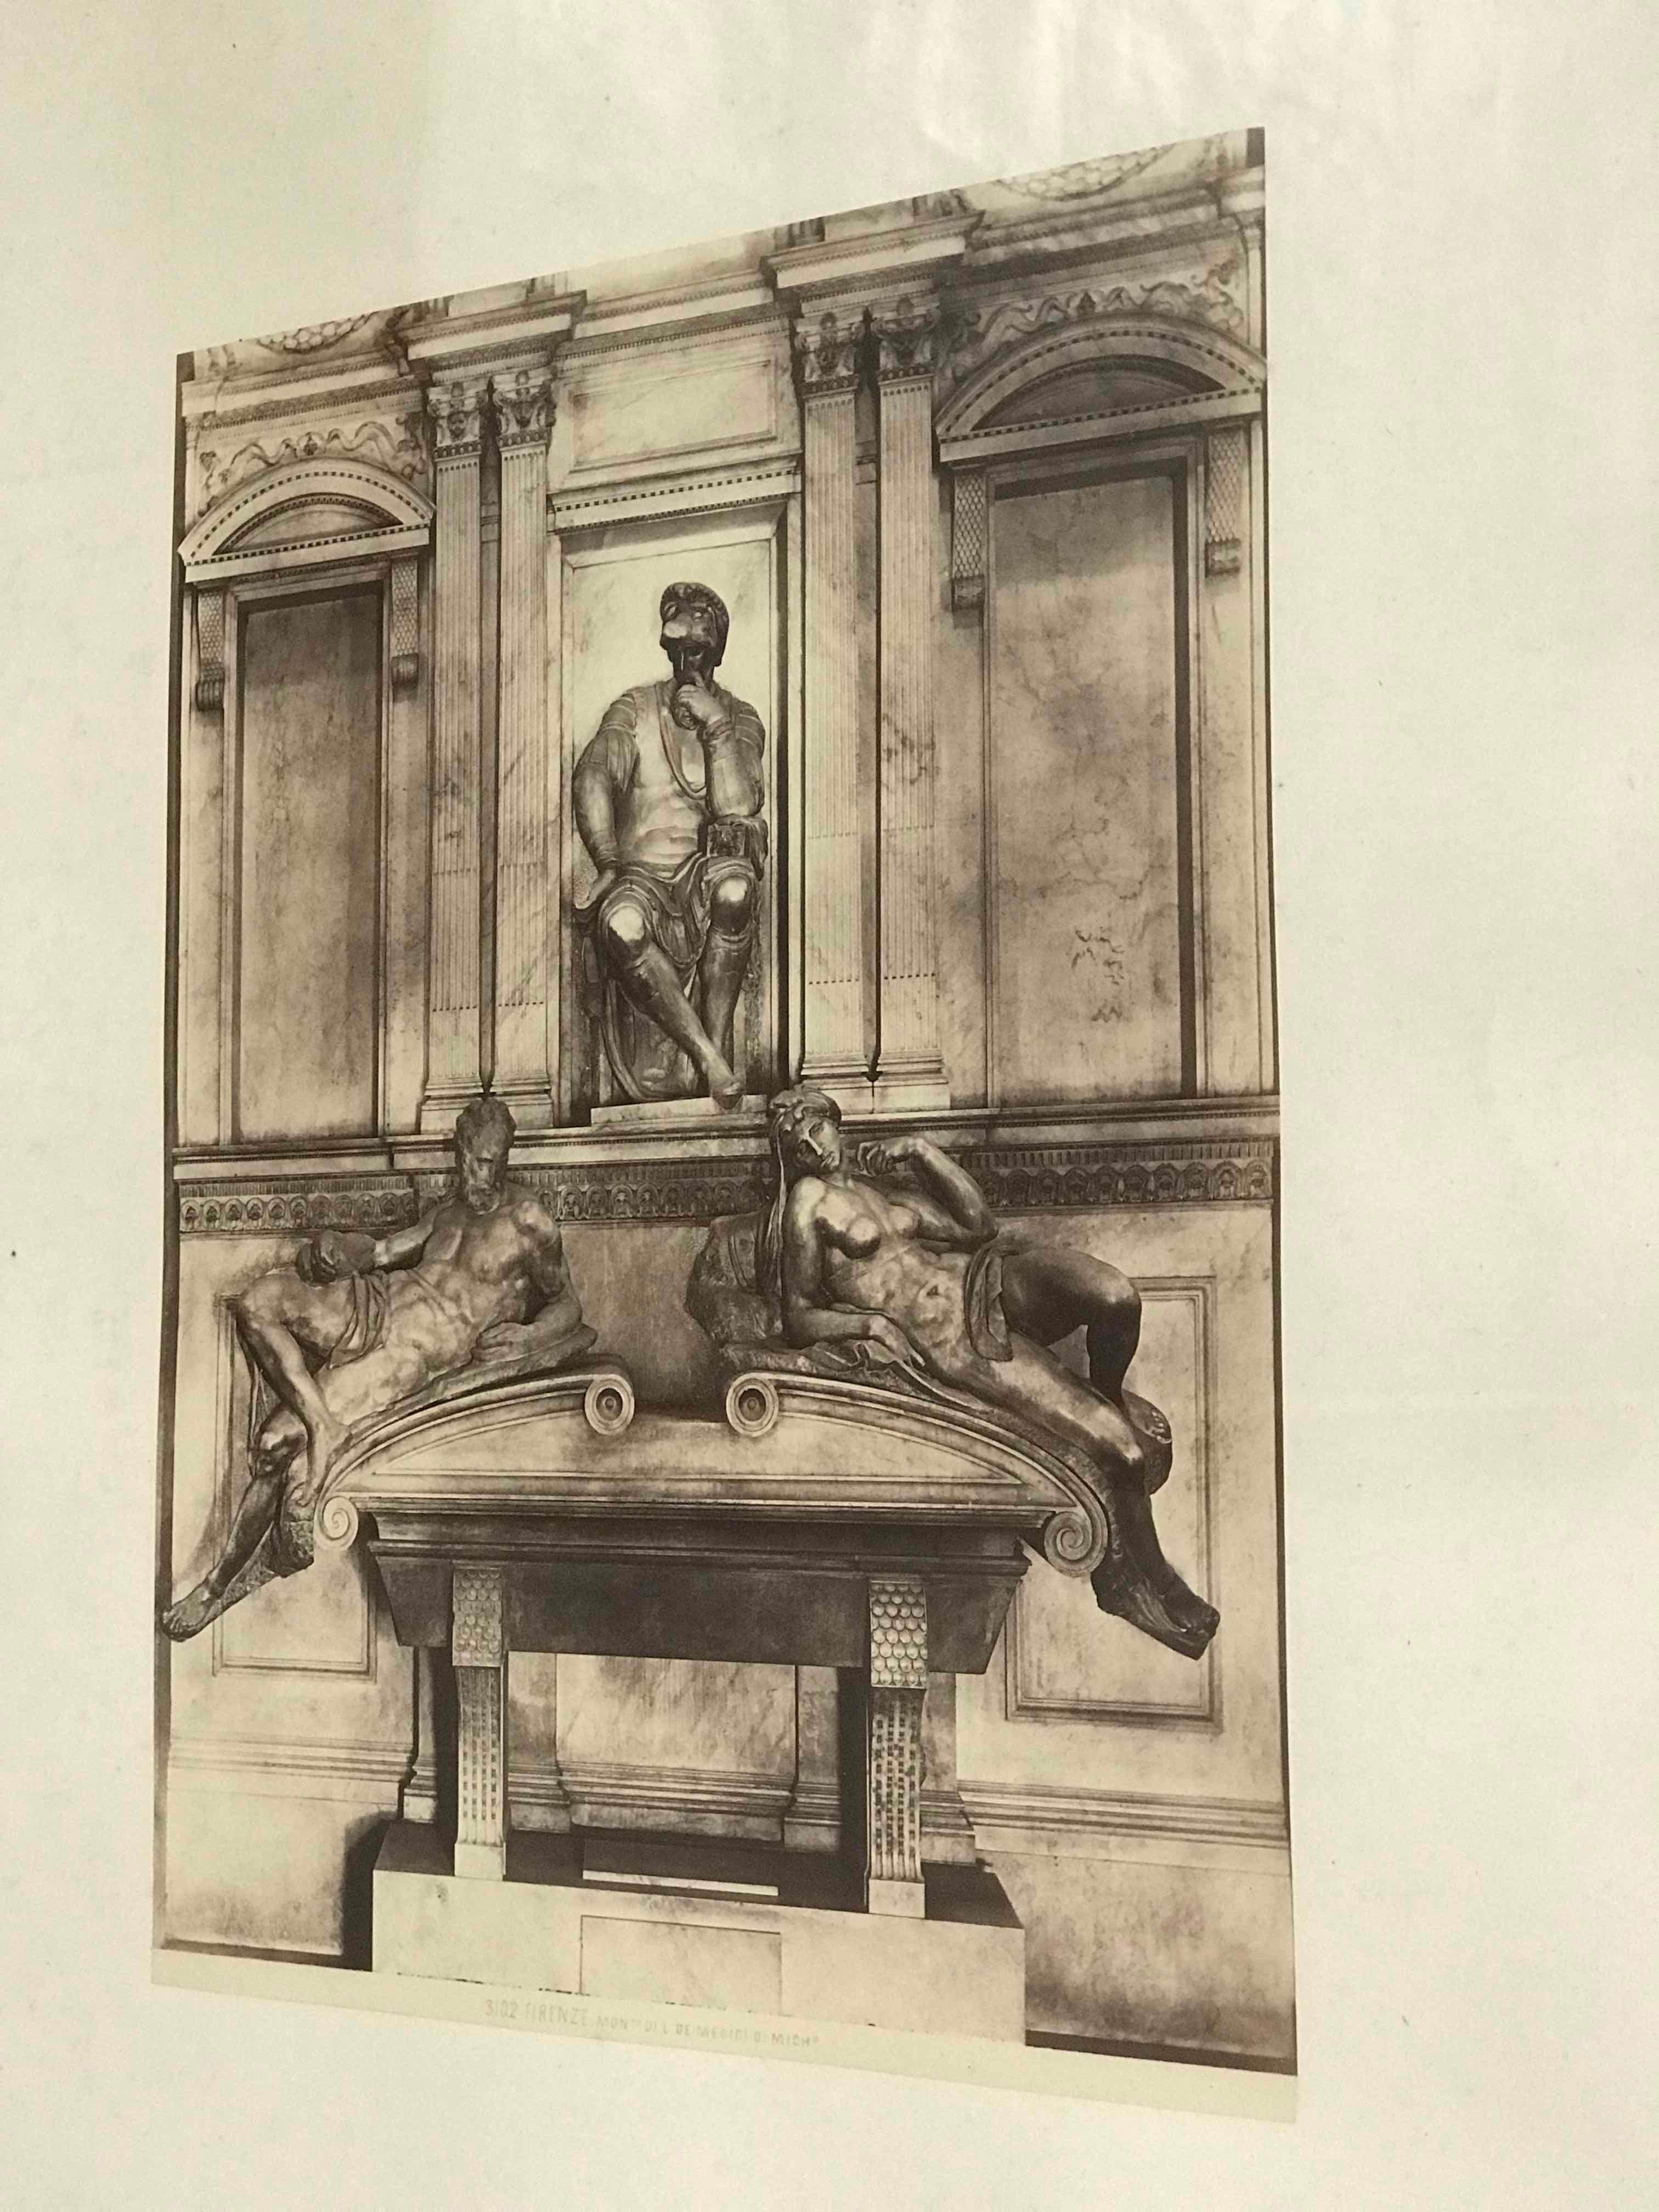 English Turn of the Century Photograph of Italian Architectural Details